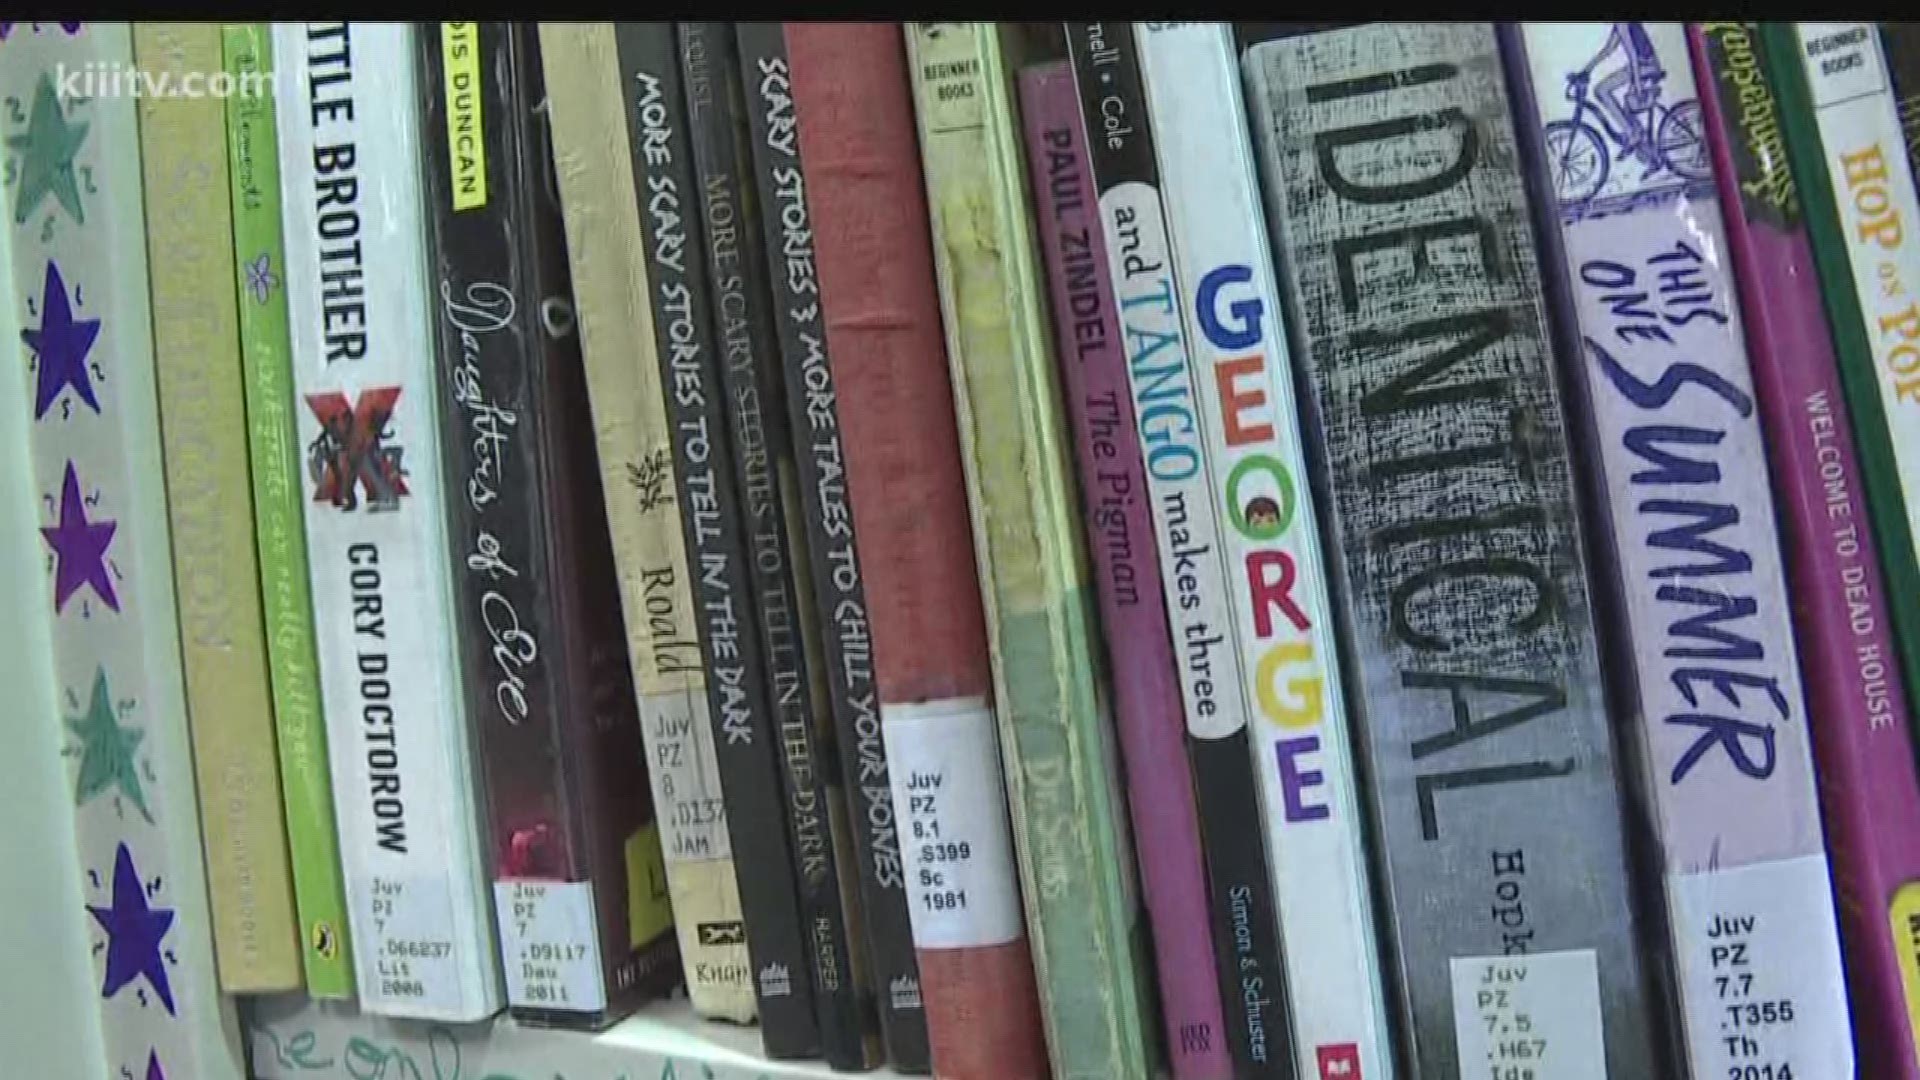 Students on campus at Texas A&M University-Corpus Christi are learning that some of the books they might have read as a kid are still banned in some schools because of their sometimes controversial topics.